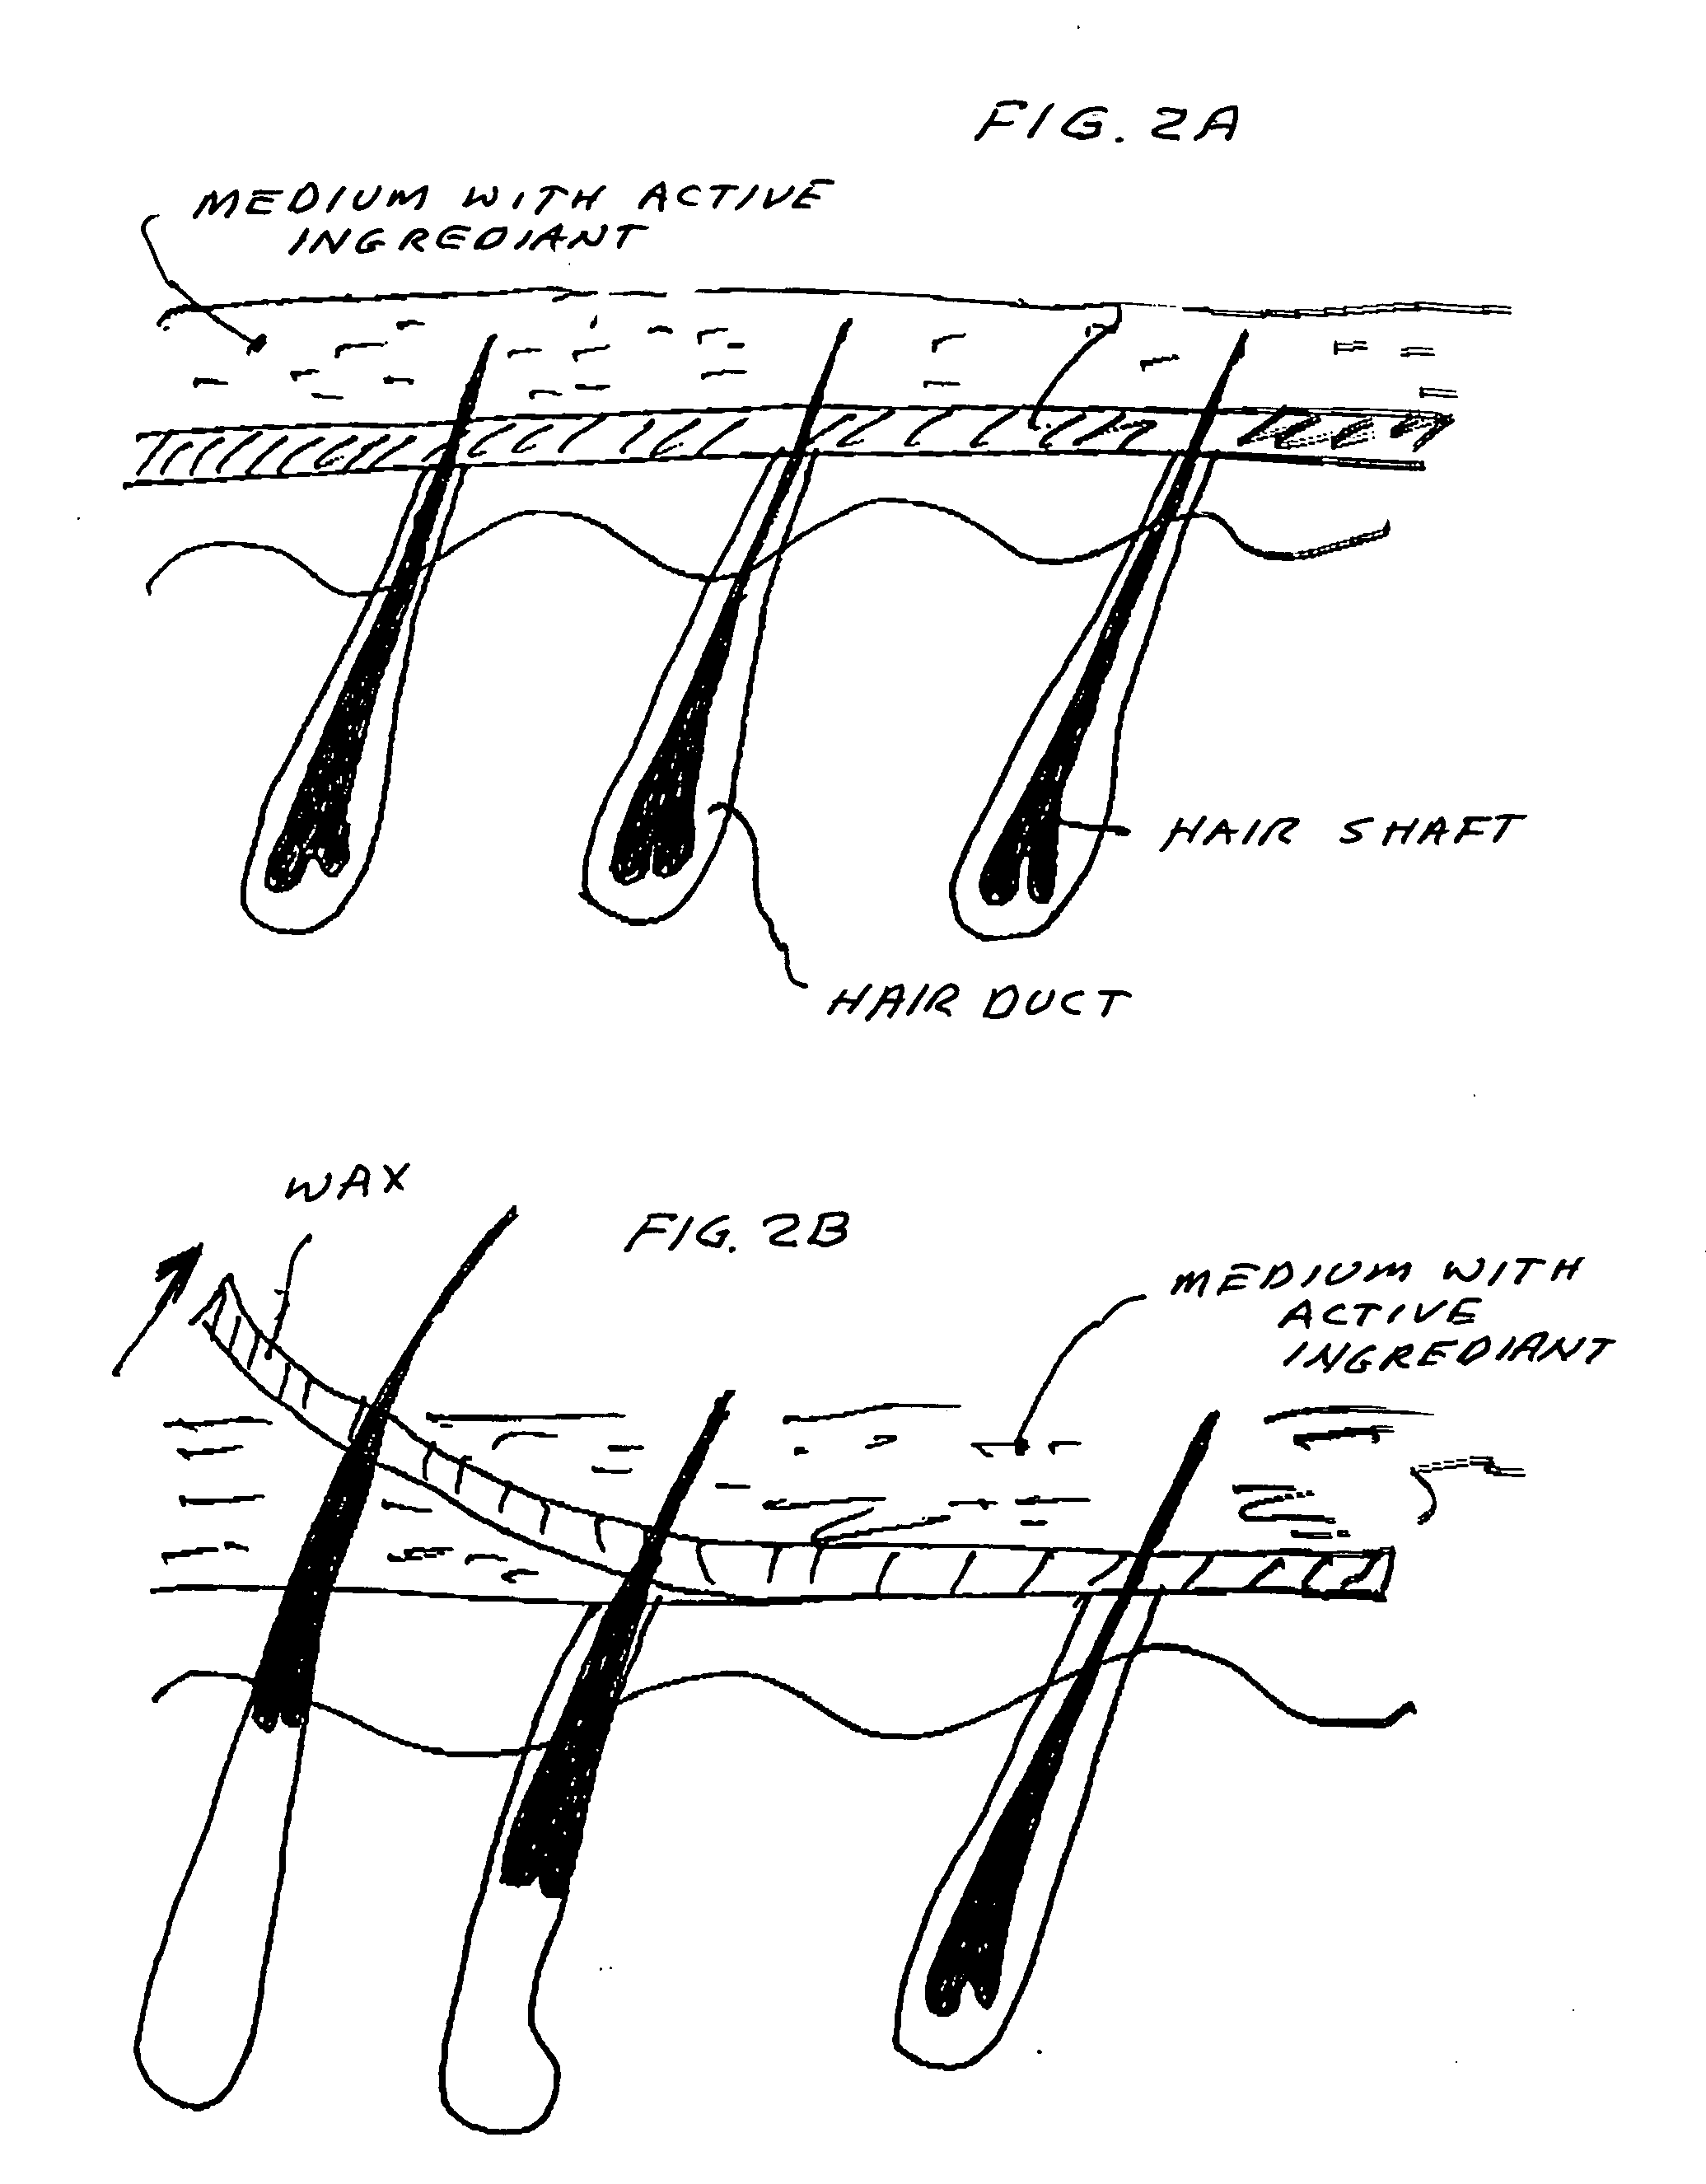 Device and method for hair growth from stem cells